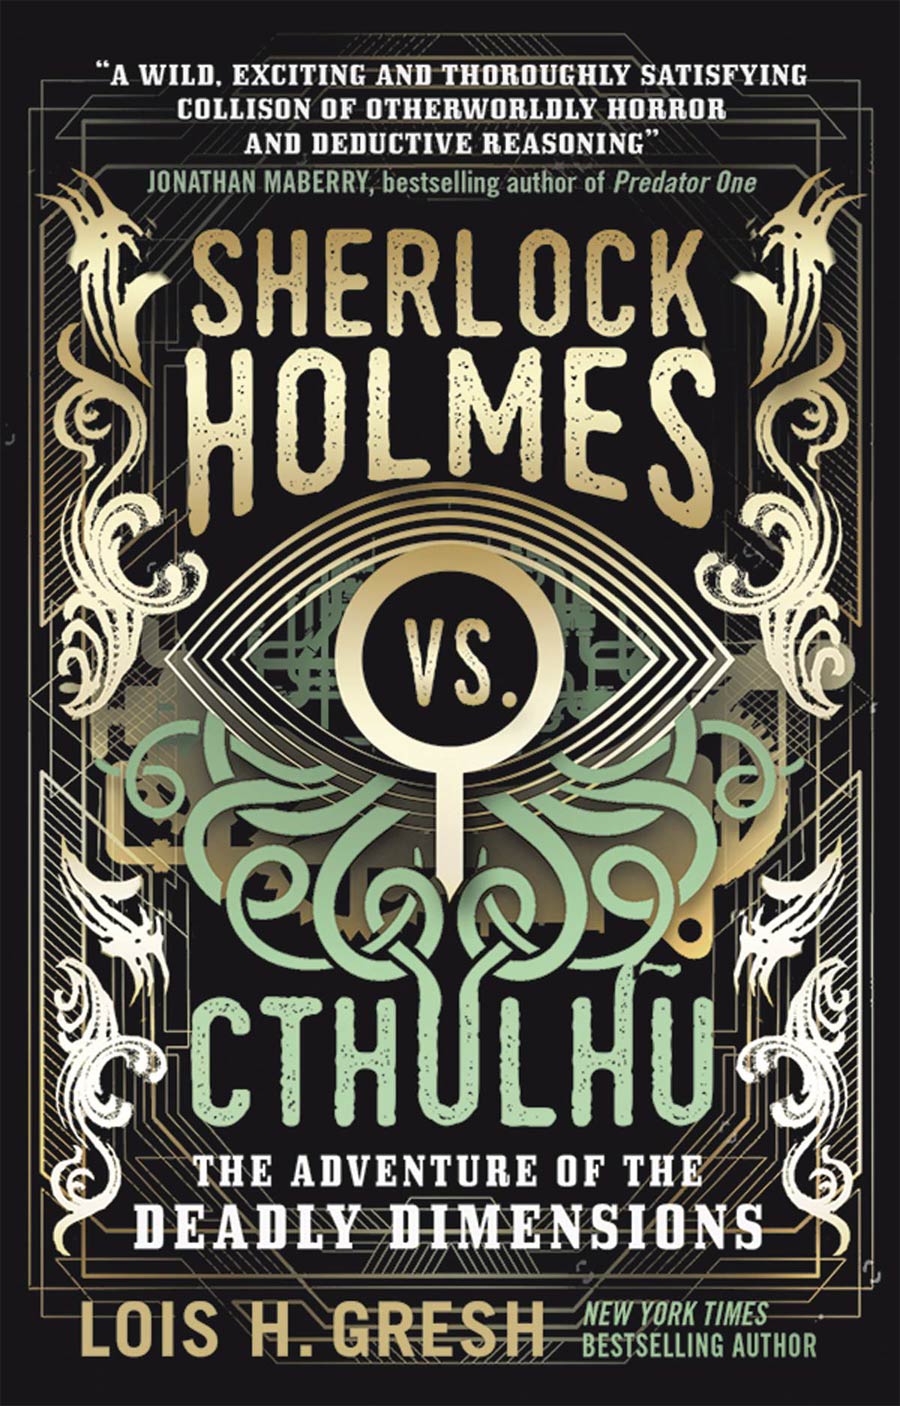 Sherlock Holmes vs Cthulhu Adventures Of The Deadly Dimensions MMPB